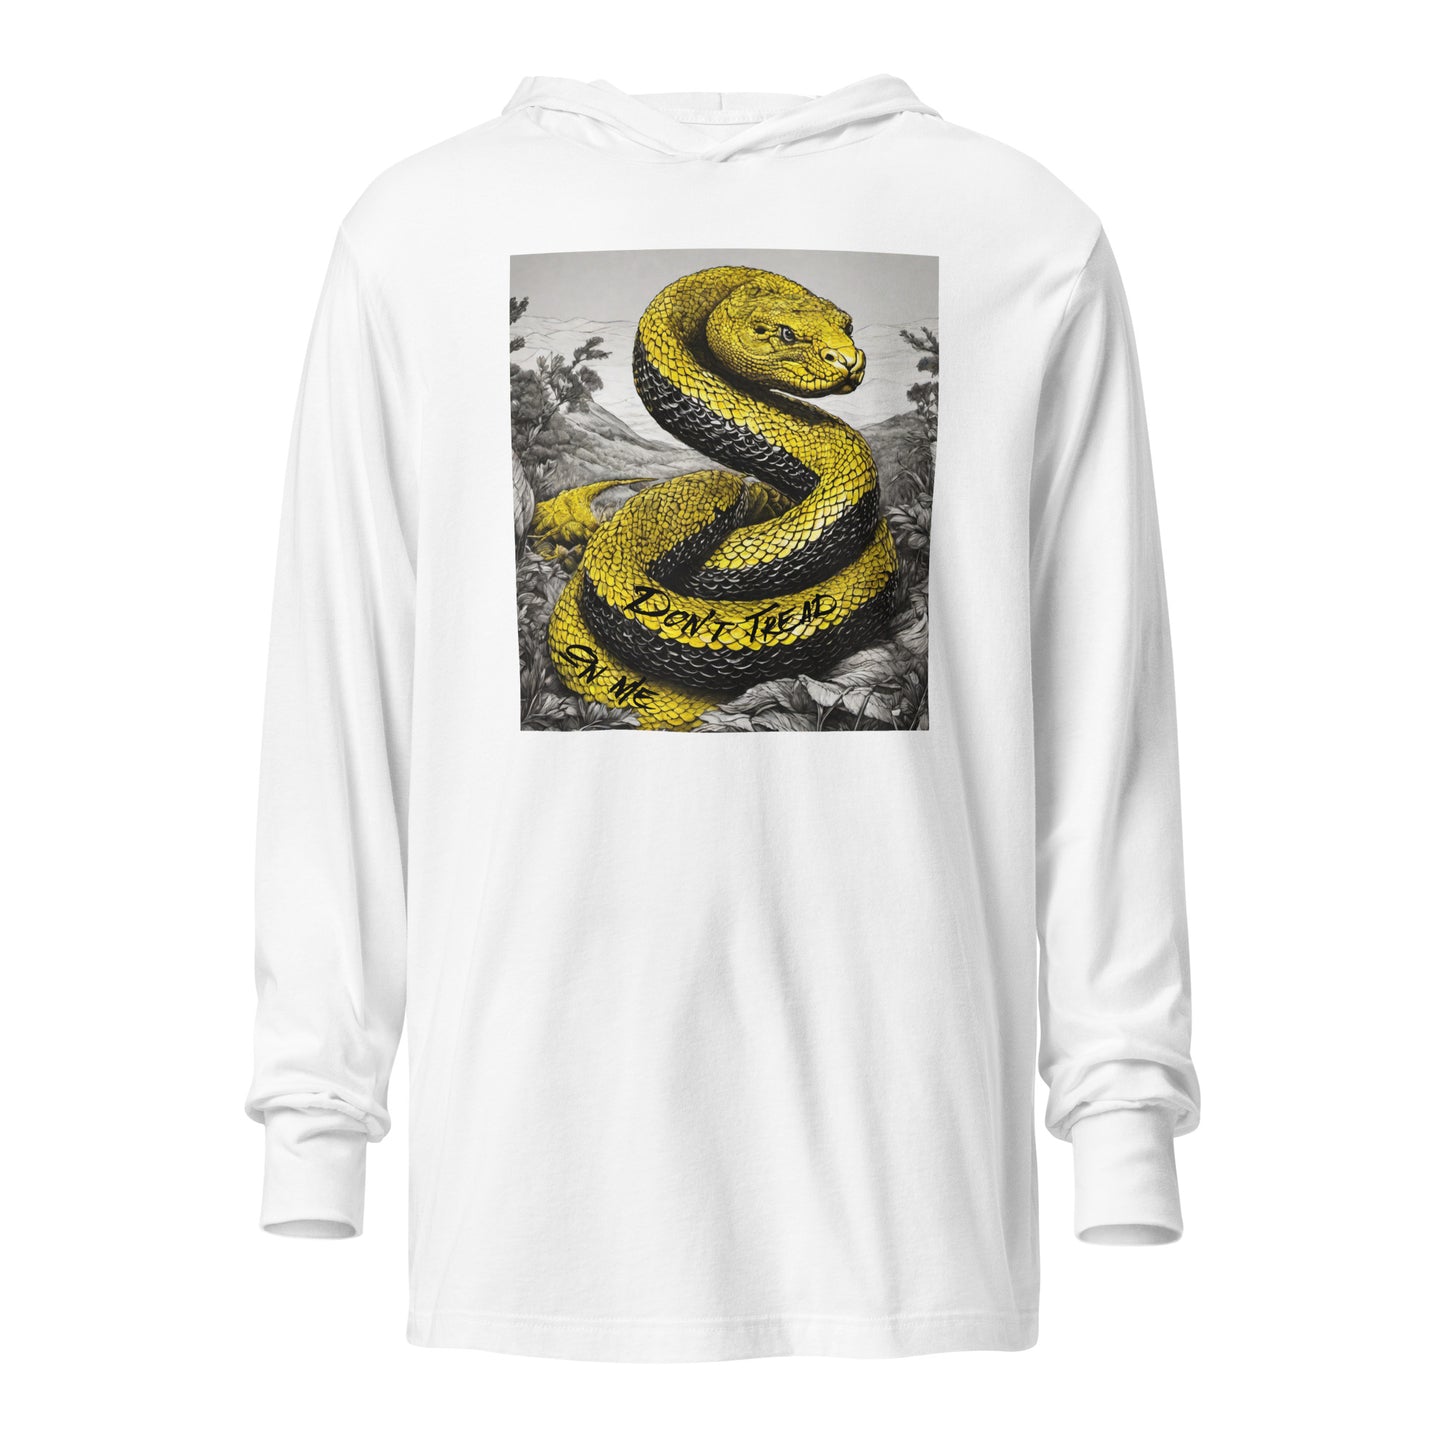 Don't Tread On Me Hooded Long-Sleeve Tee White